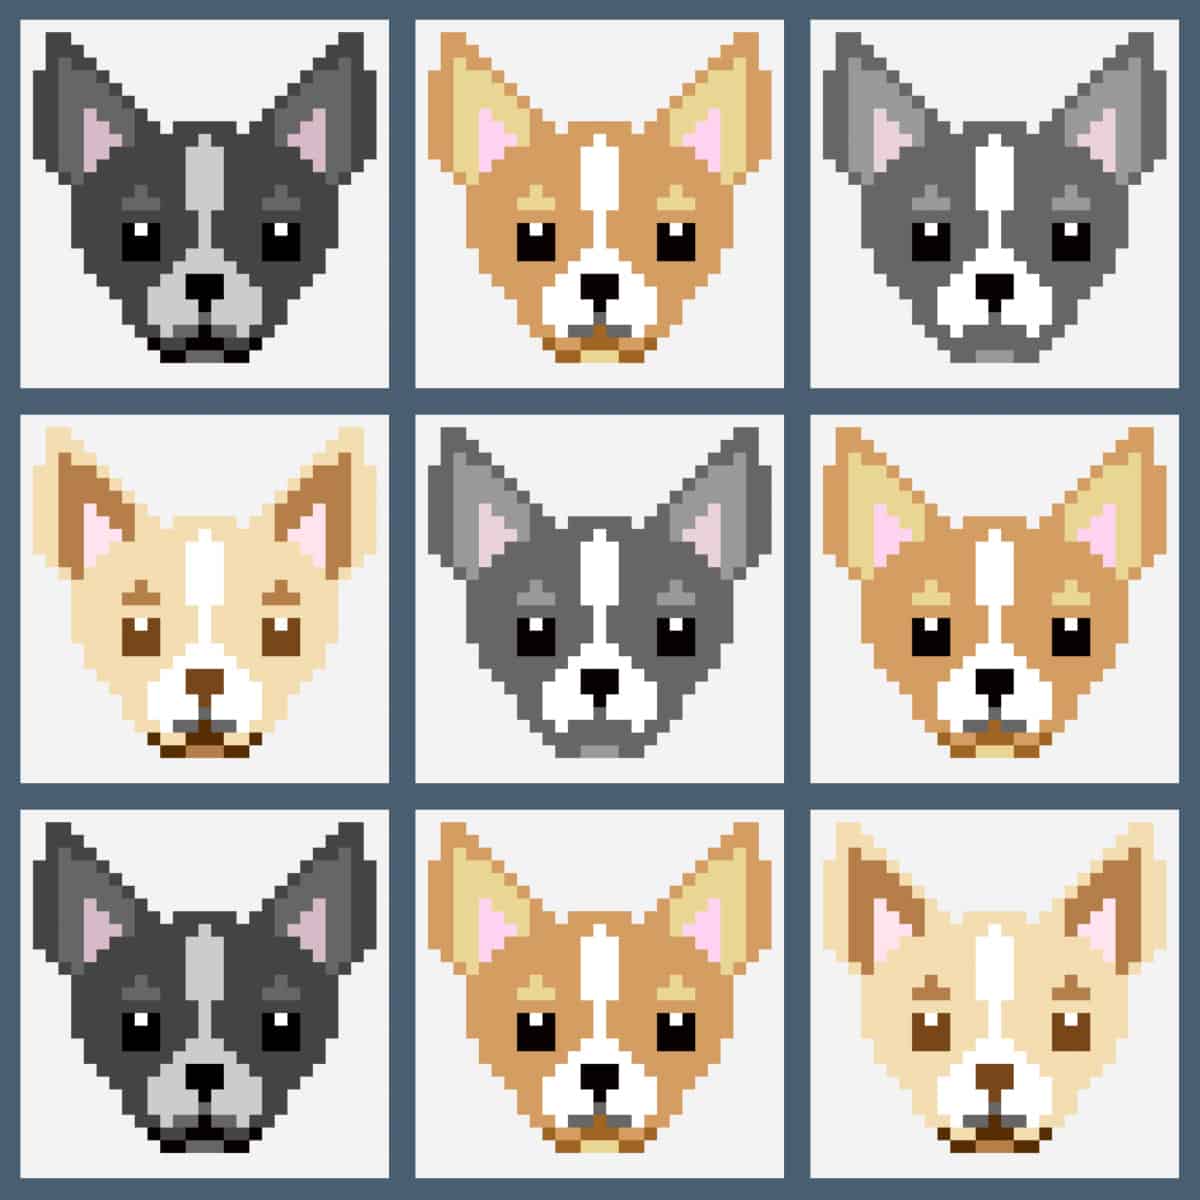 This image shows a pixelated version of a corner to corner crochet dog blanket, featuring a dark gray and white chihuahua, a tan and white chihuahua and a light brown and white chihuahua.